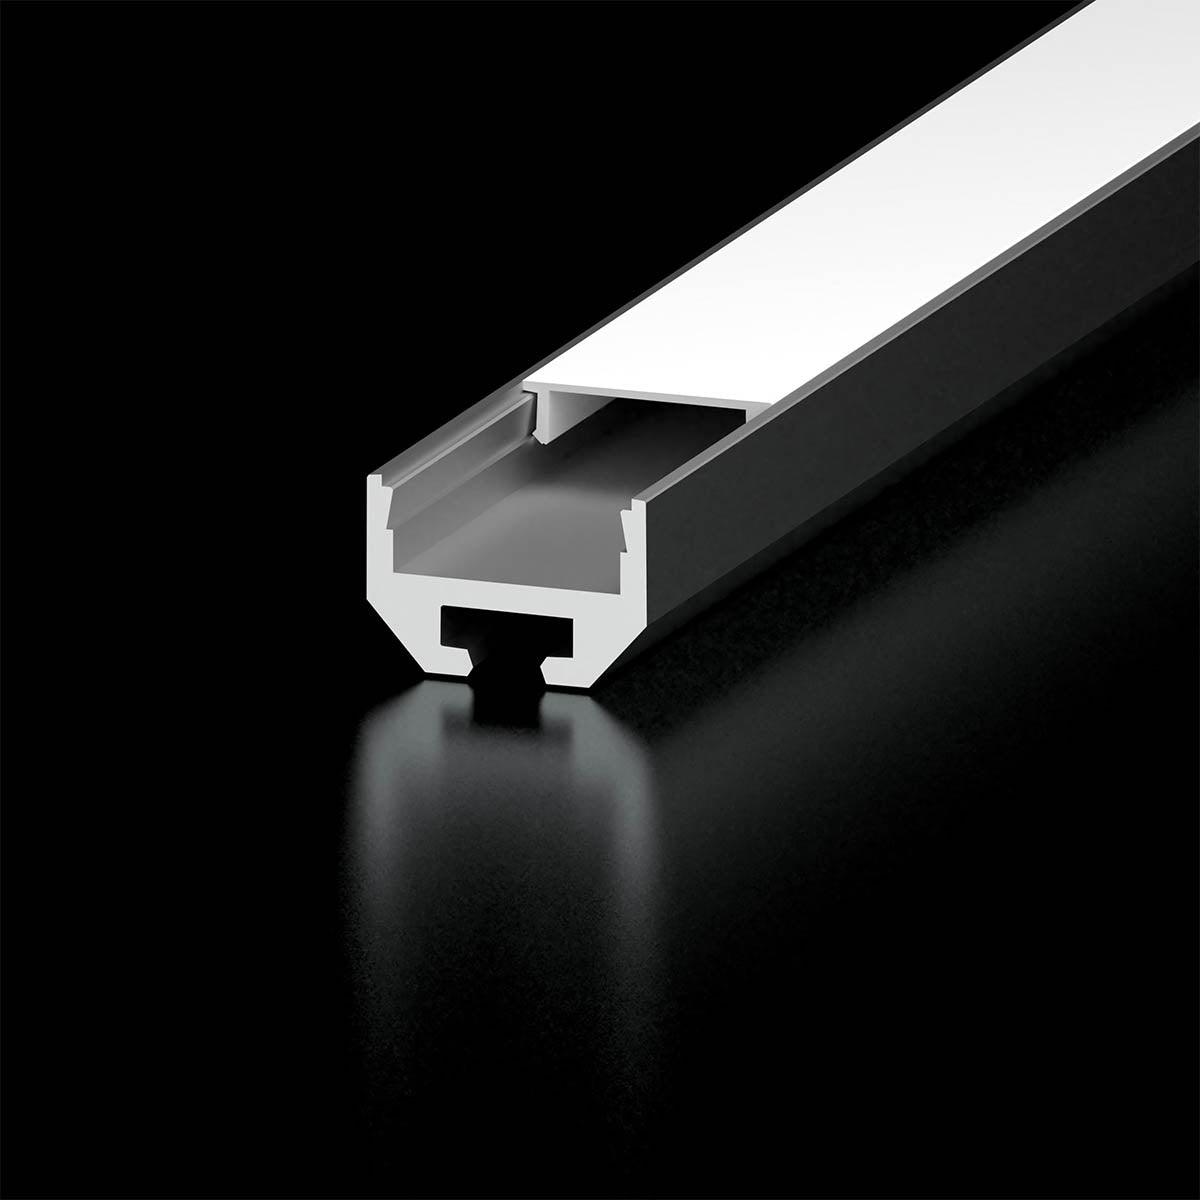 96in. Chromapath Builder, Square White LED Channels for 12mm strip lights, Pack of 10 - Bees Lighting